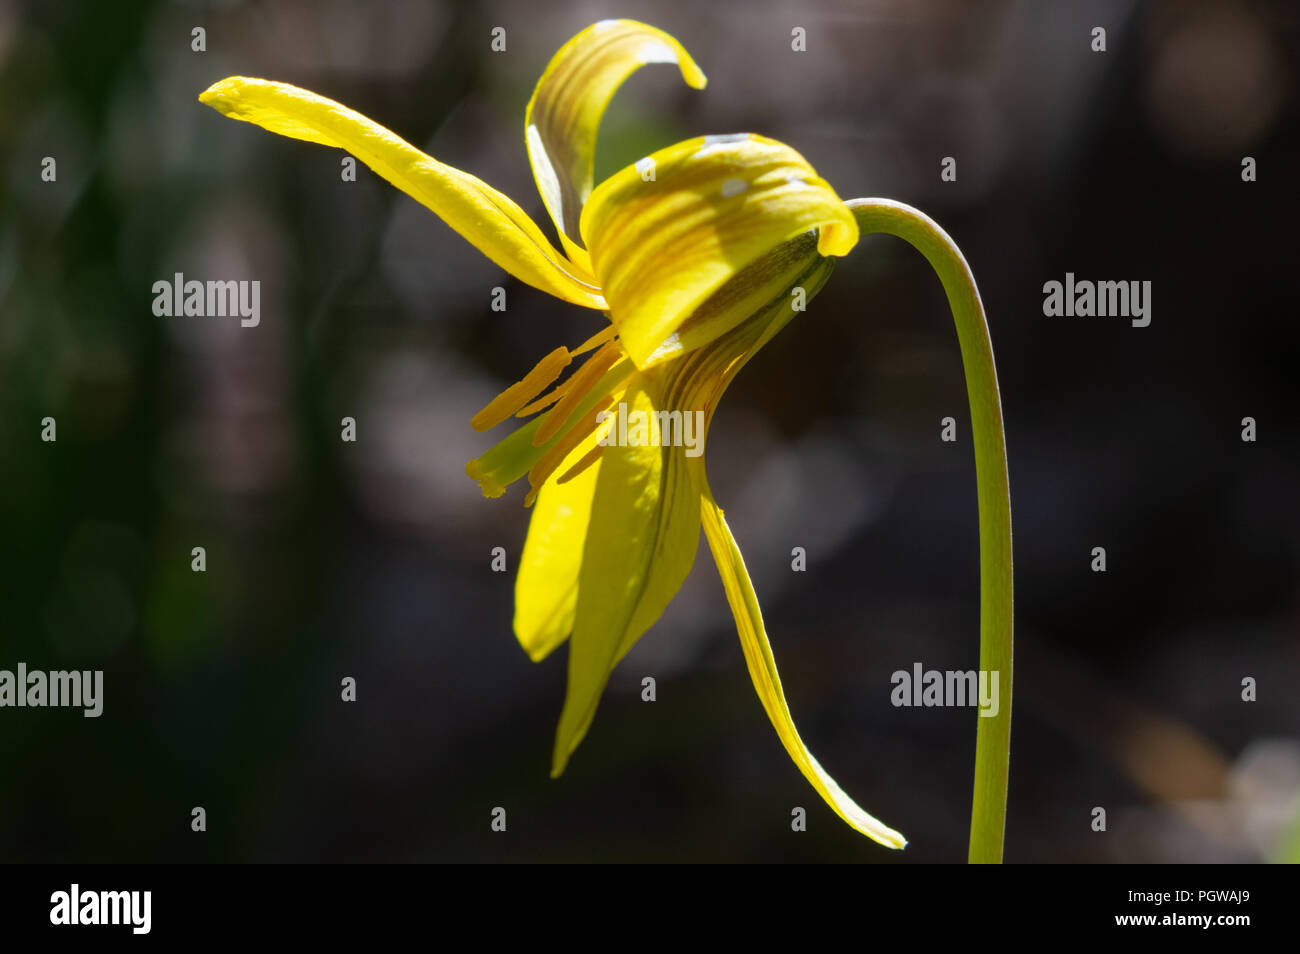 Close up side view shot of a yellow wildflower, trout lily, against a dark background Stock Photo